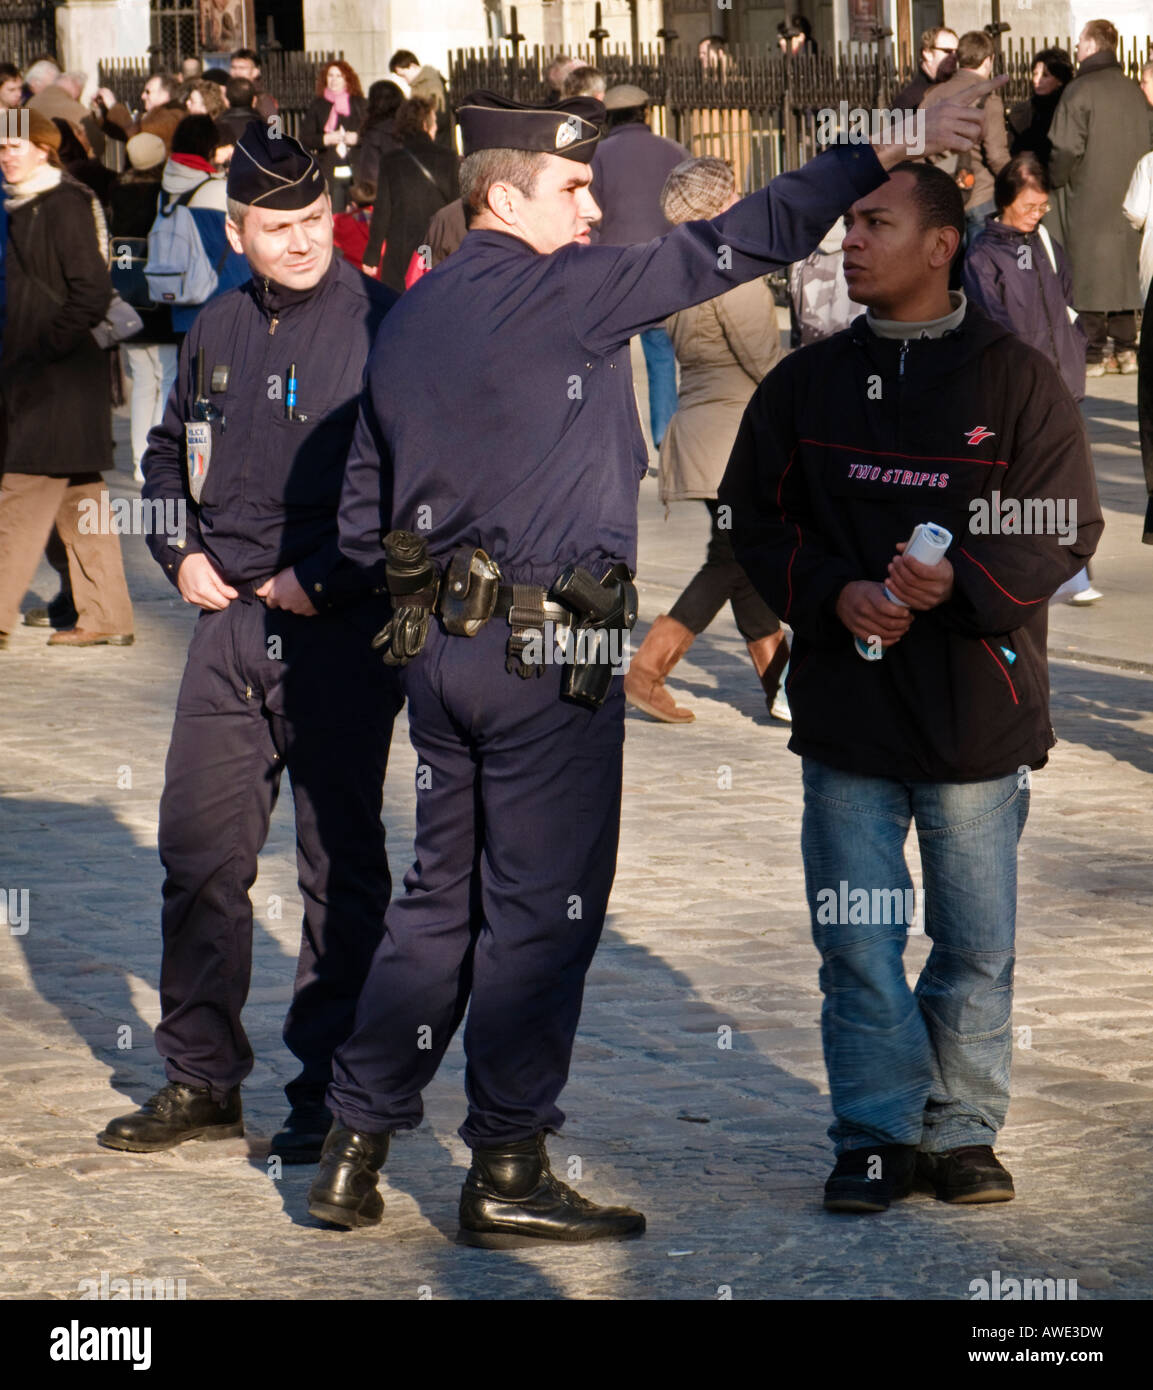 French National Policeman gives directions to a tourist outside Notre Dame Paris France Europe Stock Photo